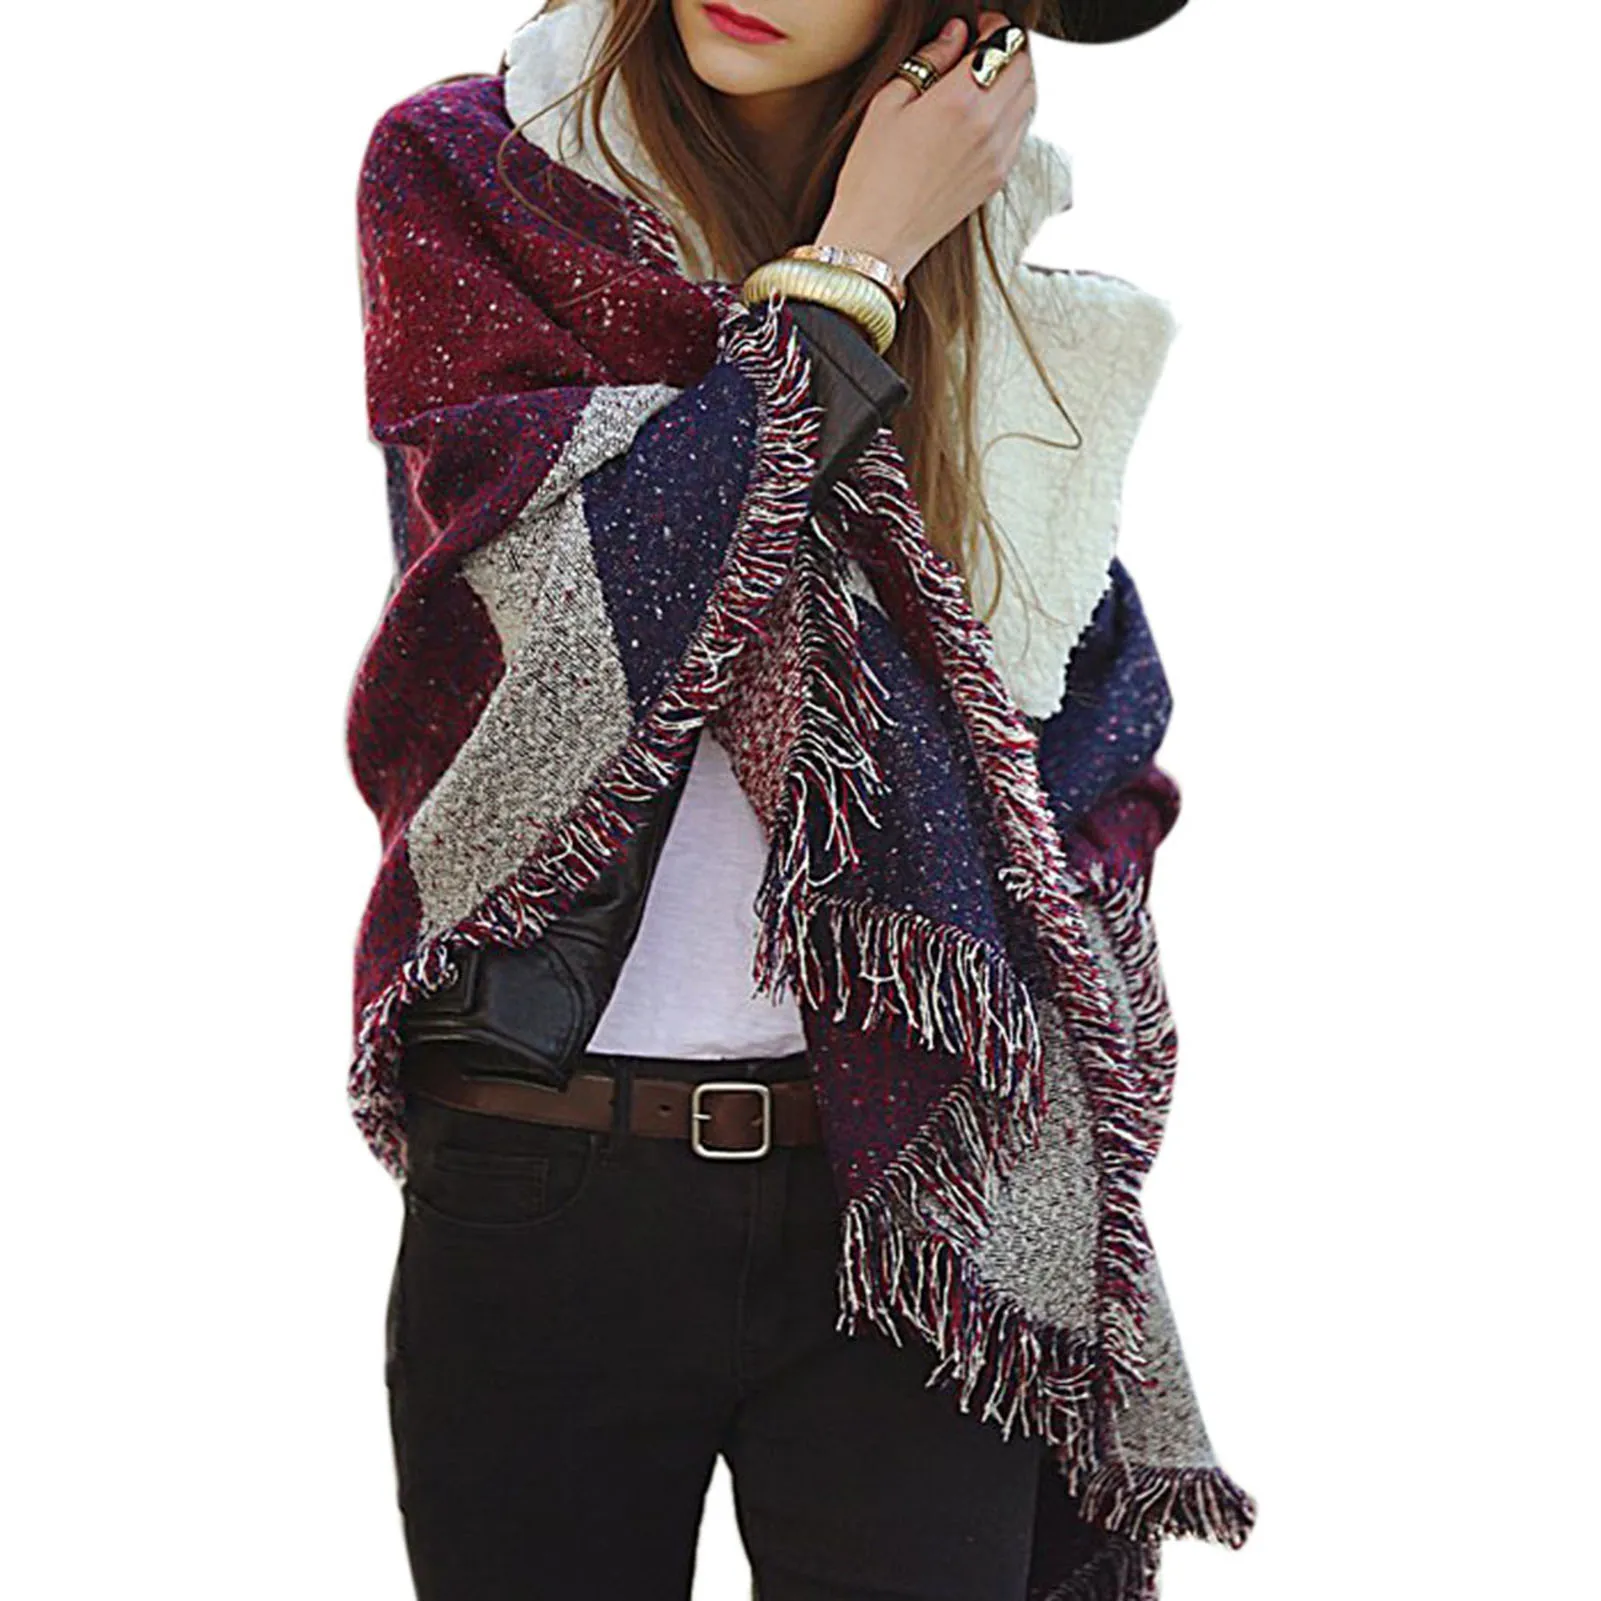 

Cashmere Soft Warm Scarf Soft Classic Check Plaid Printed Winter Scarf for Outdoor Trip Dating Shopping